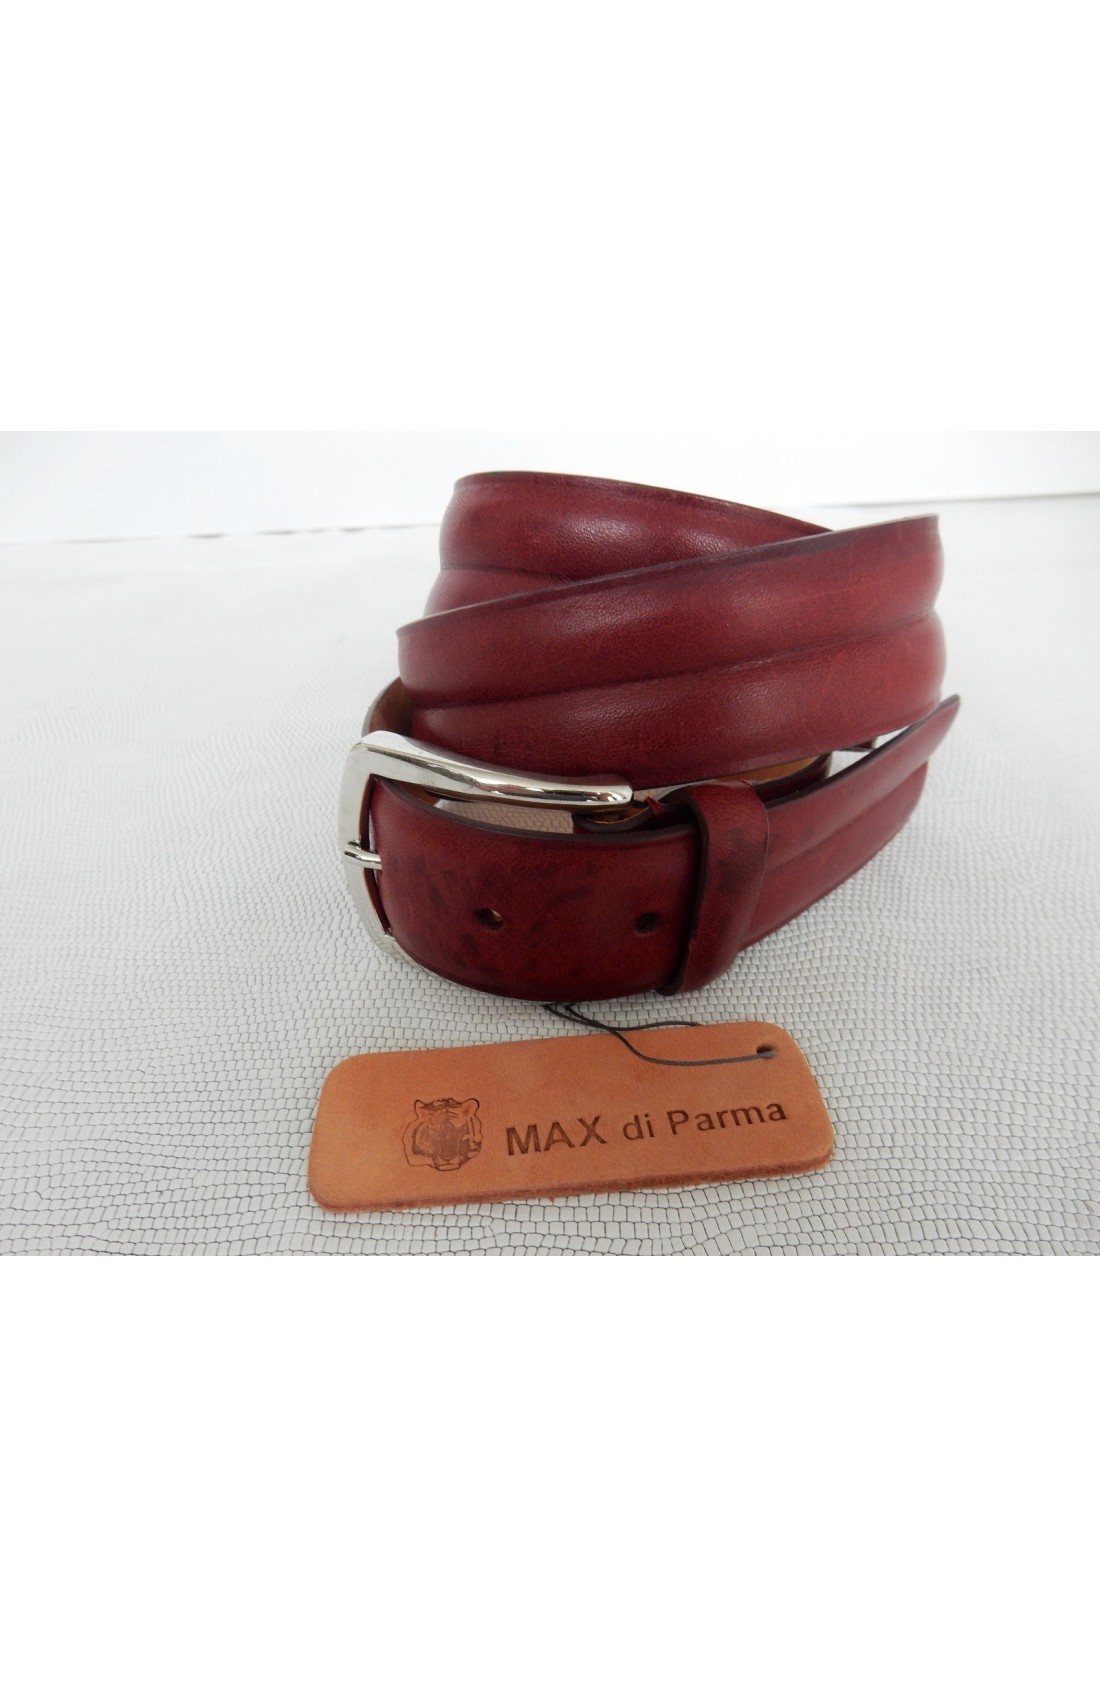 art. 4971 KANSAS CUOIO bull leather with central groove mm.35 var.7 dark  red (UNLINED RESINATED without intern lining in nubuck)